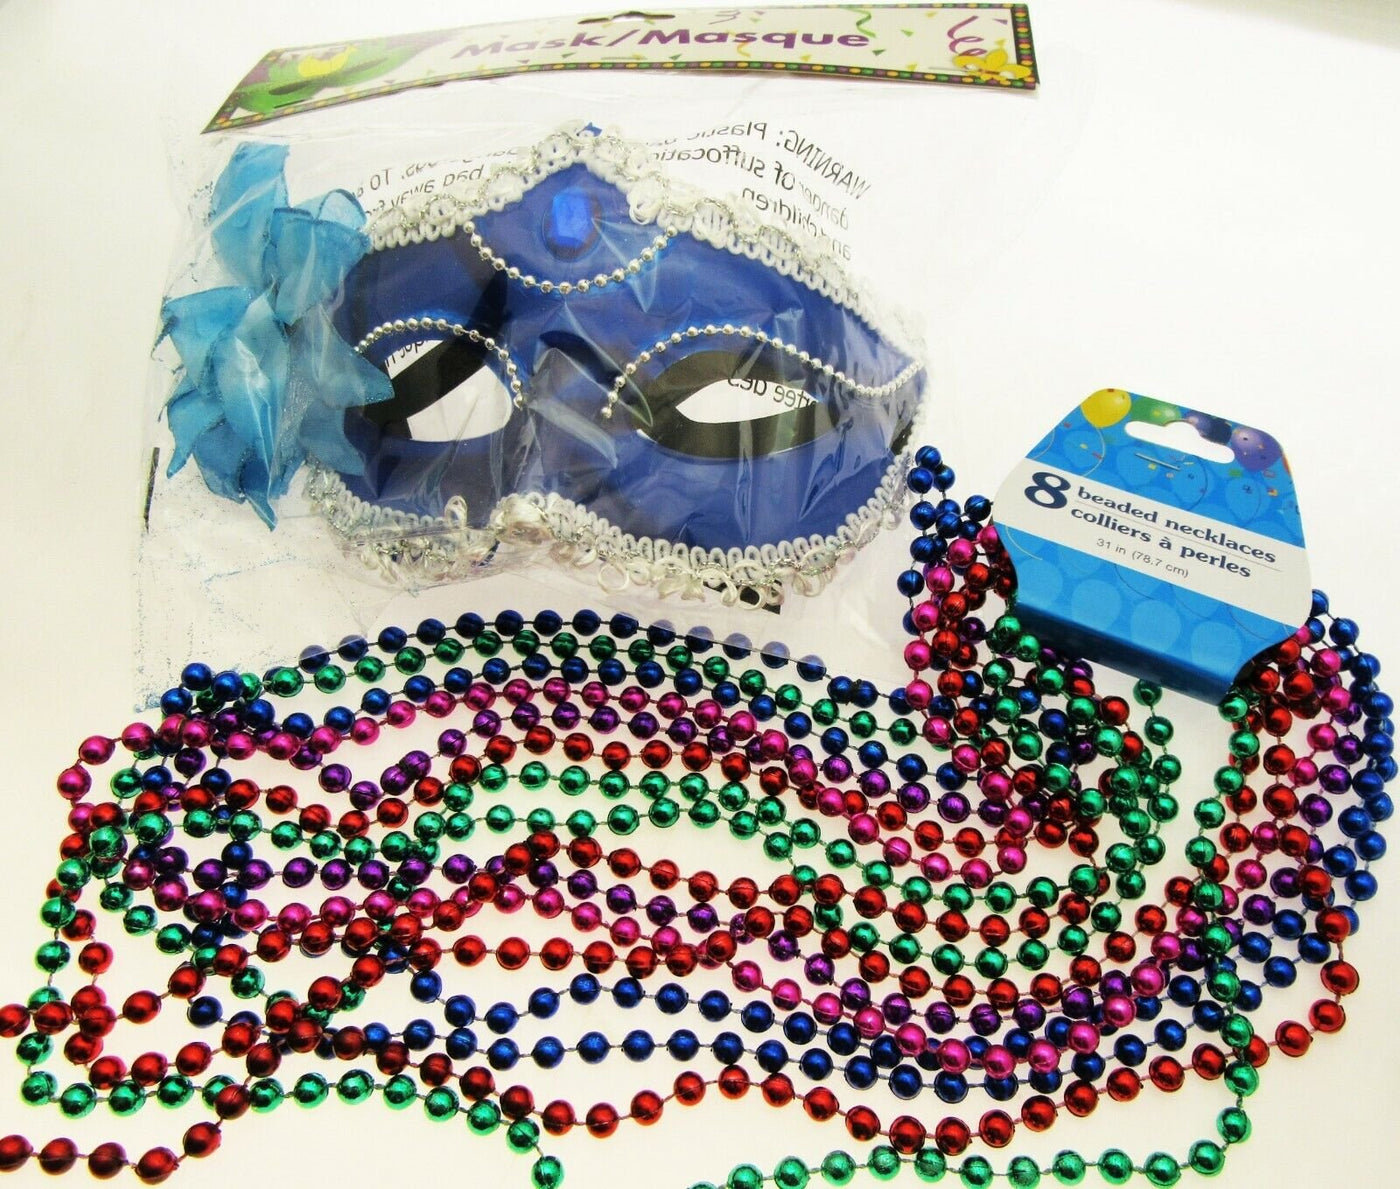 Mardi Gras Eye Mask & Necklaces Costume Mascaraed Parade New Orleans Blue Party